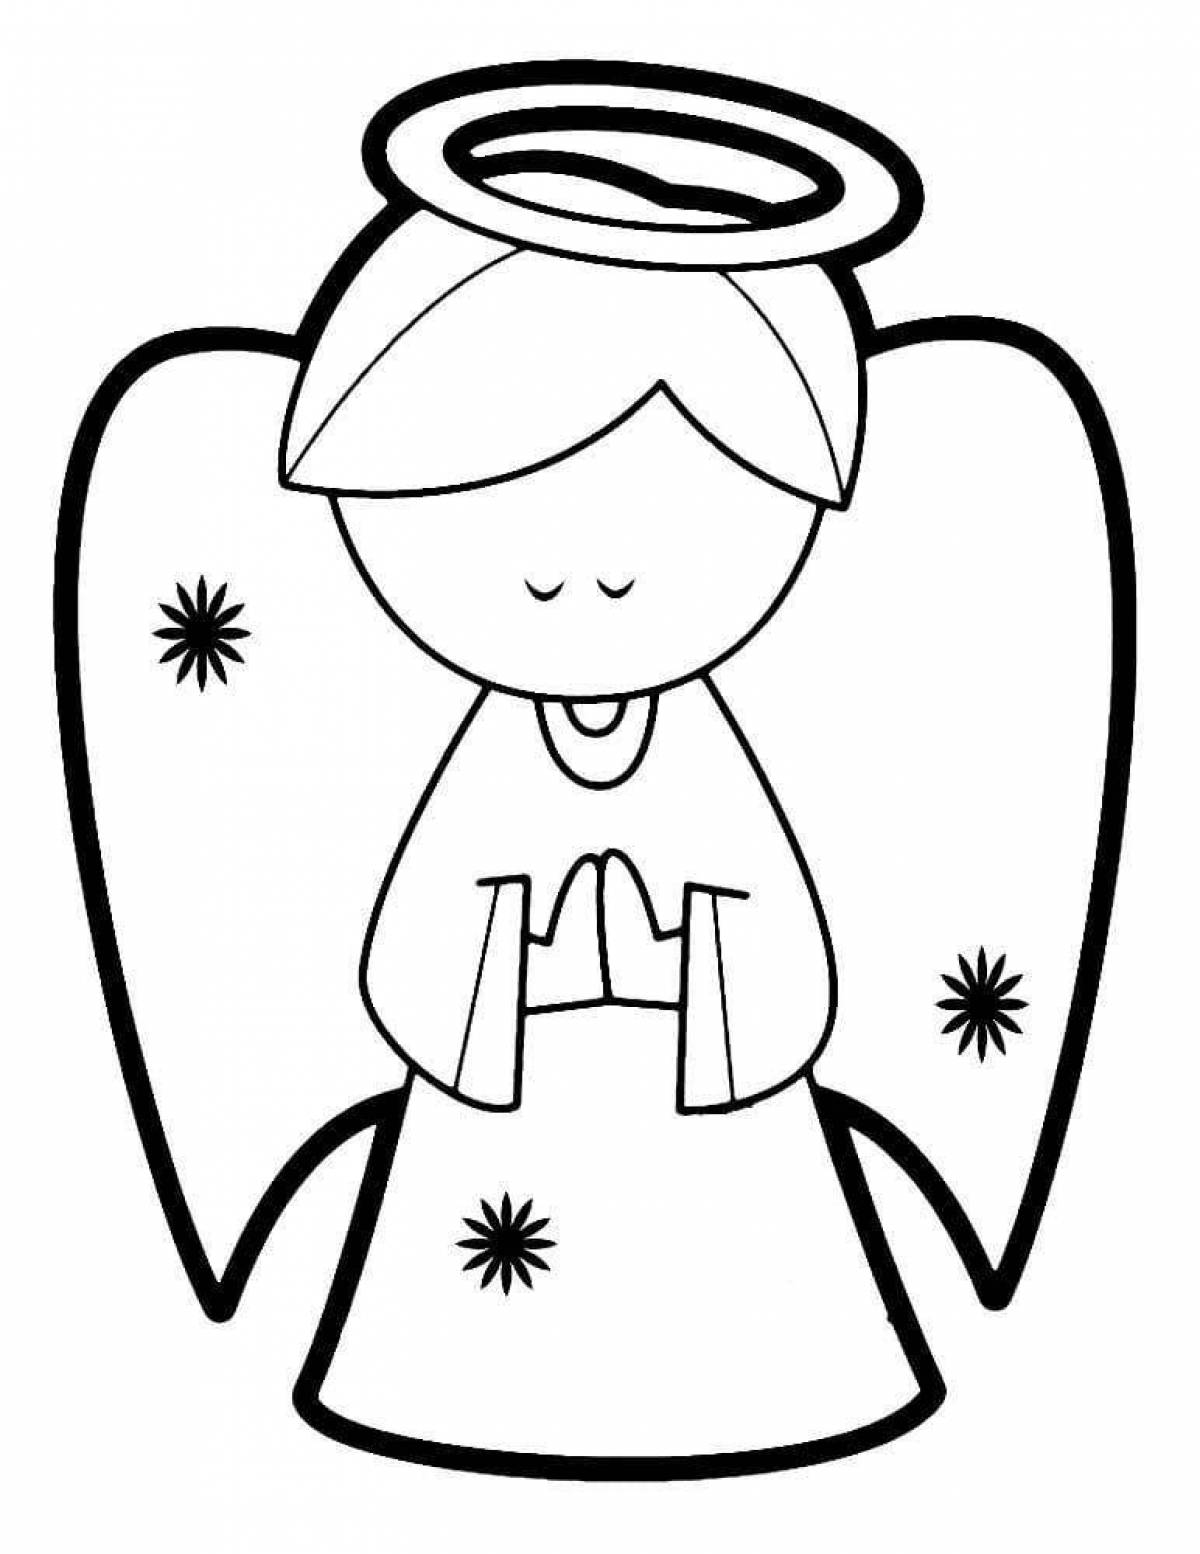 Coloring book angel from heaven for kids